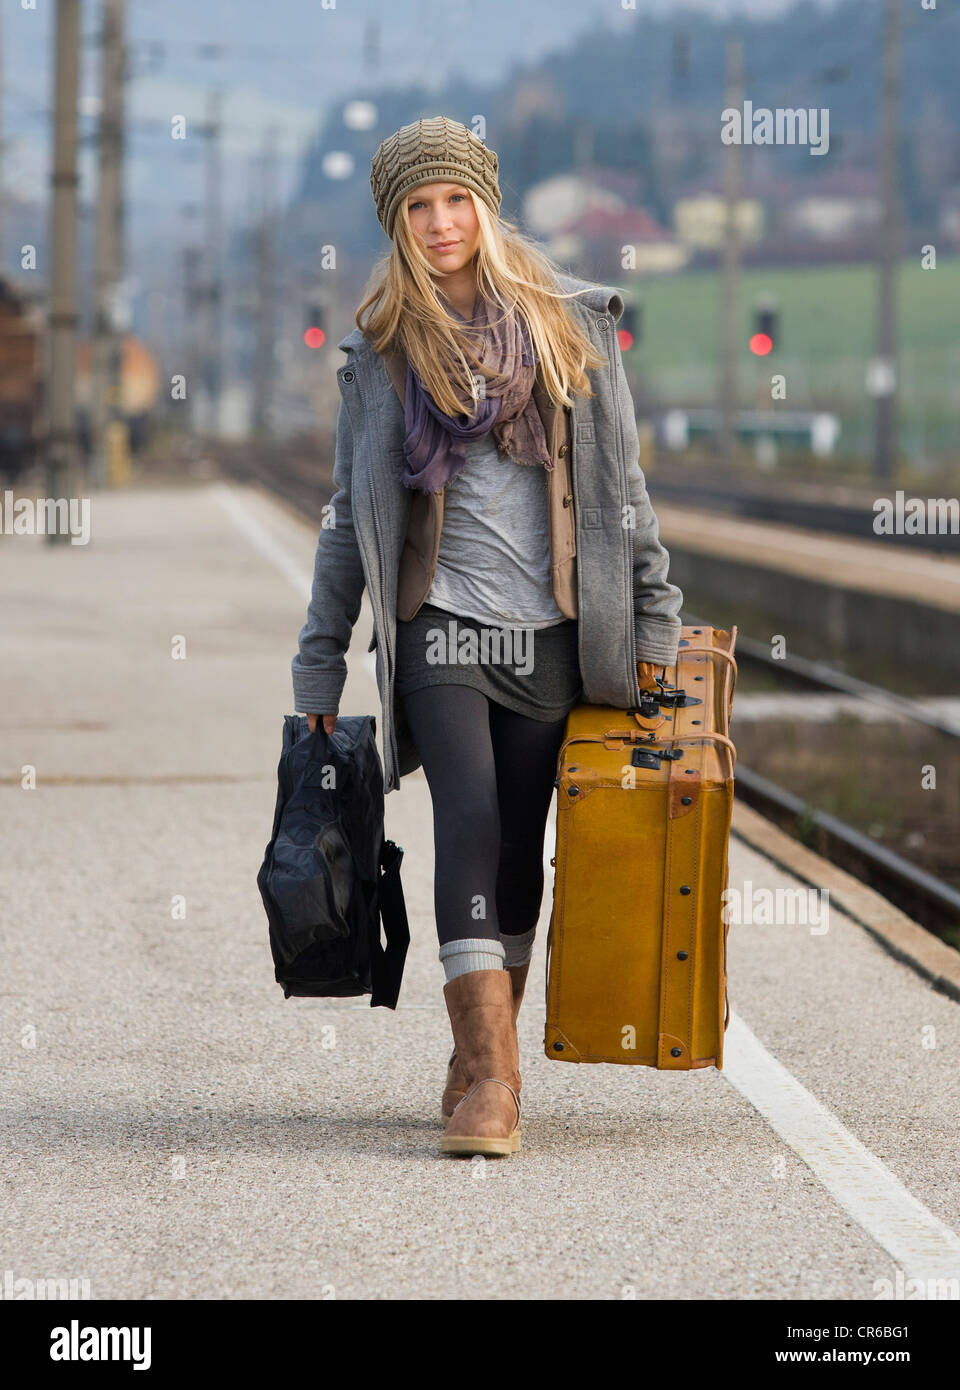 L'Autriche, Teenage girl with suitcase on gare Banque D'Images